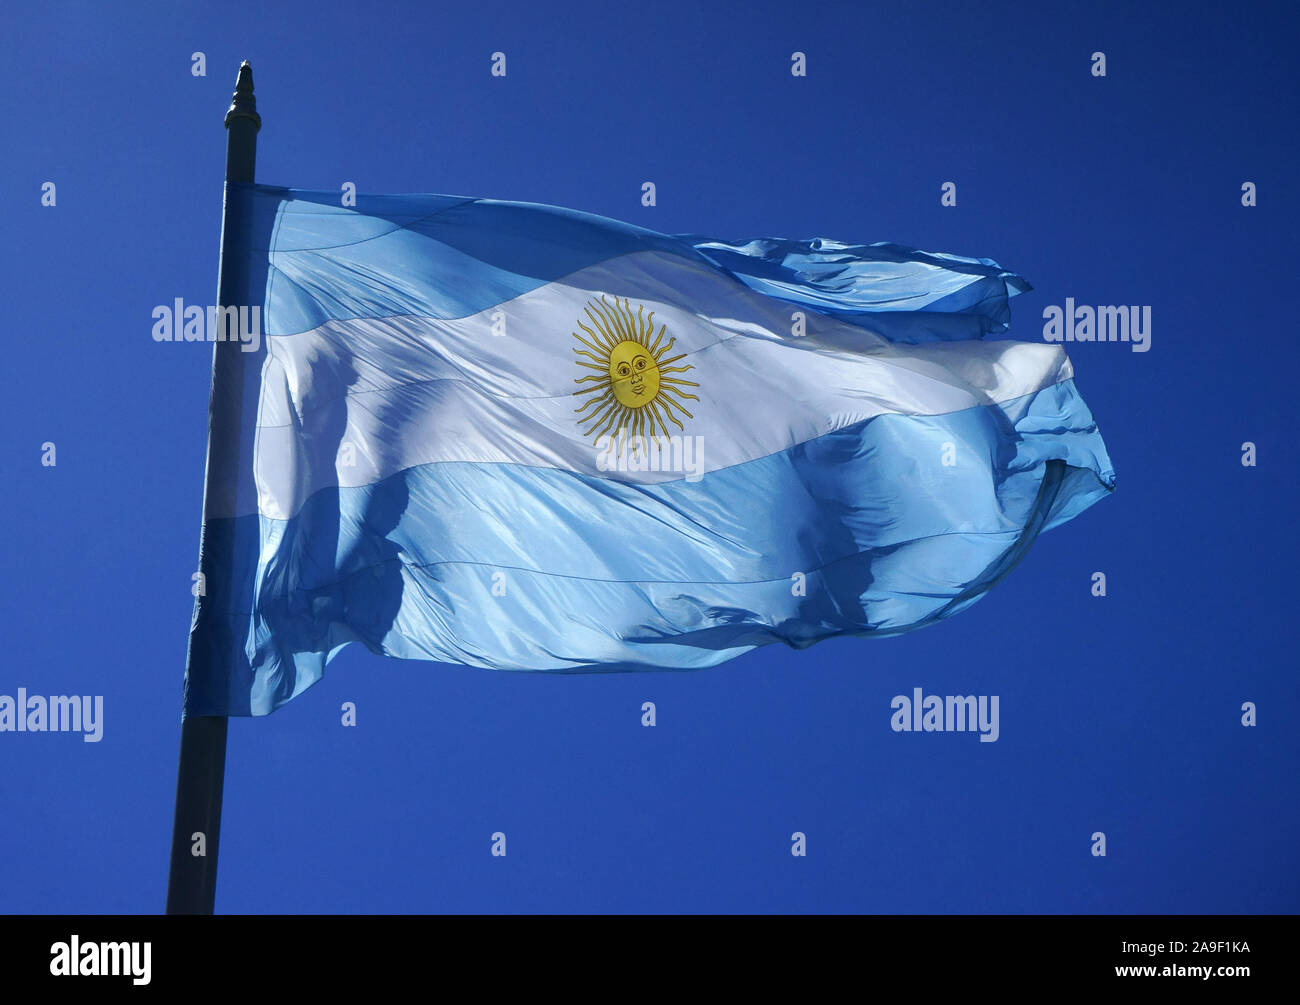 Flag of Argentina blowing in the wind, Plaza de Mayo, Buenos Aires, Argentina Stock Photo